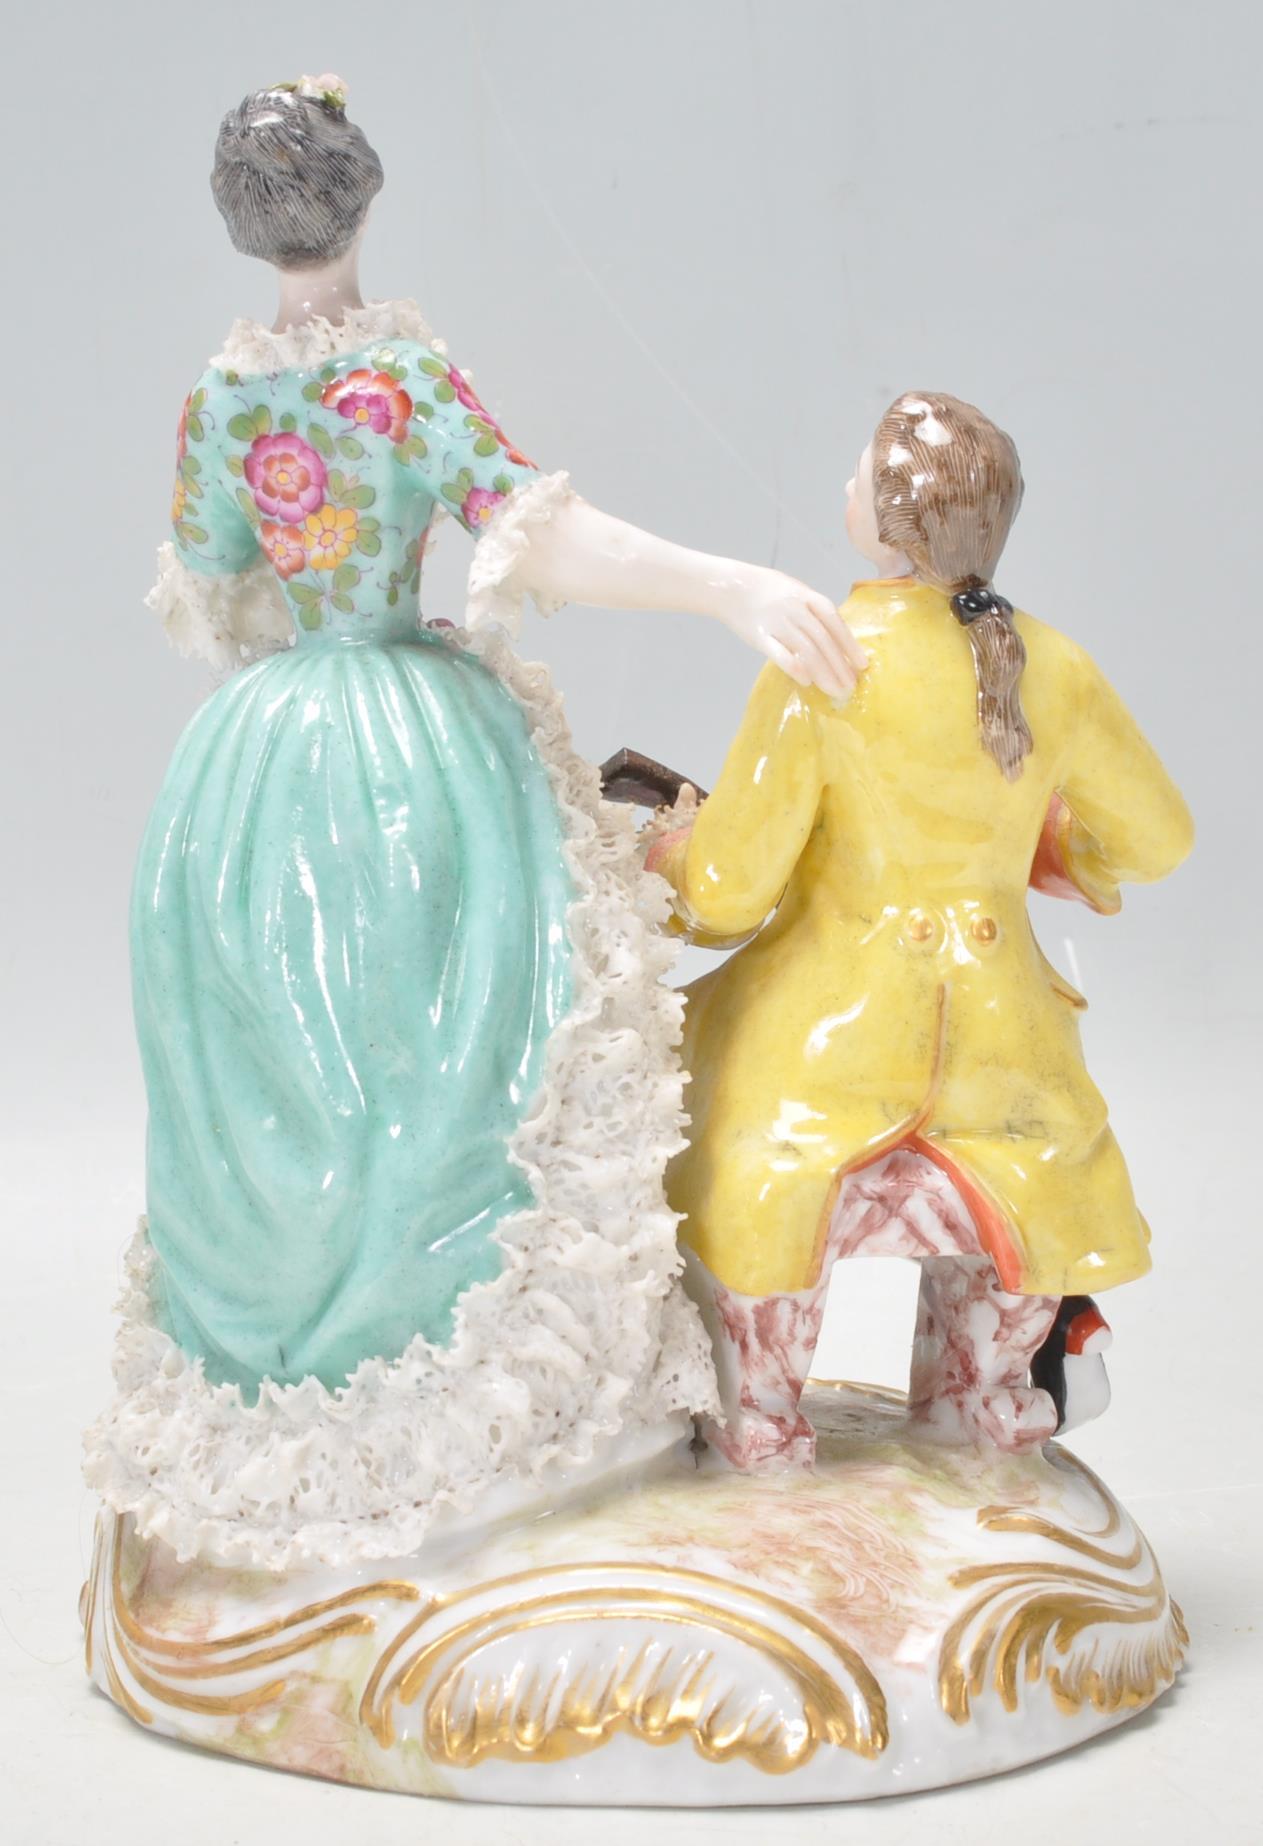 A 20th Century German Meissen / Dresden group figurine in the form of a couple with a seated man - Image 4 of 13